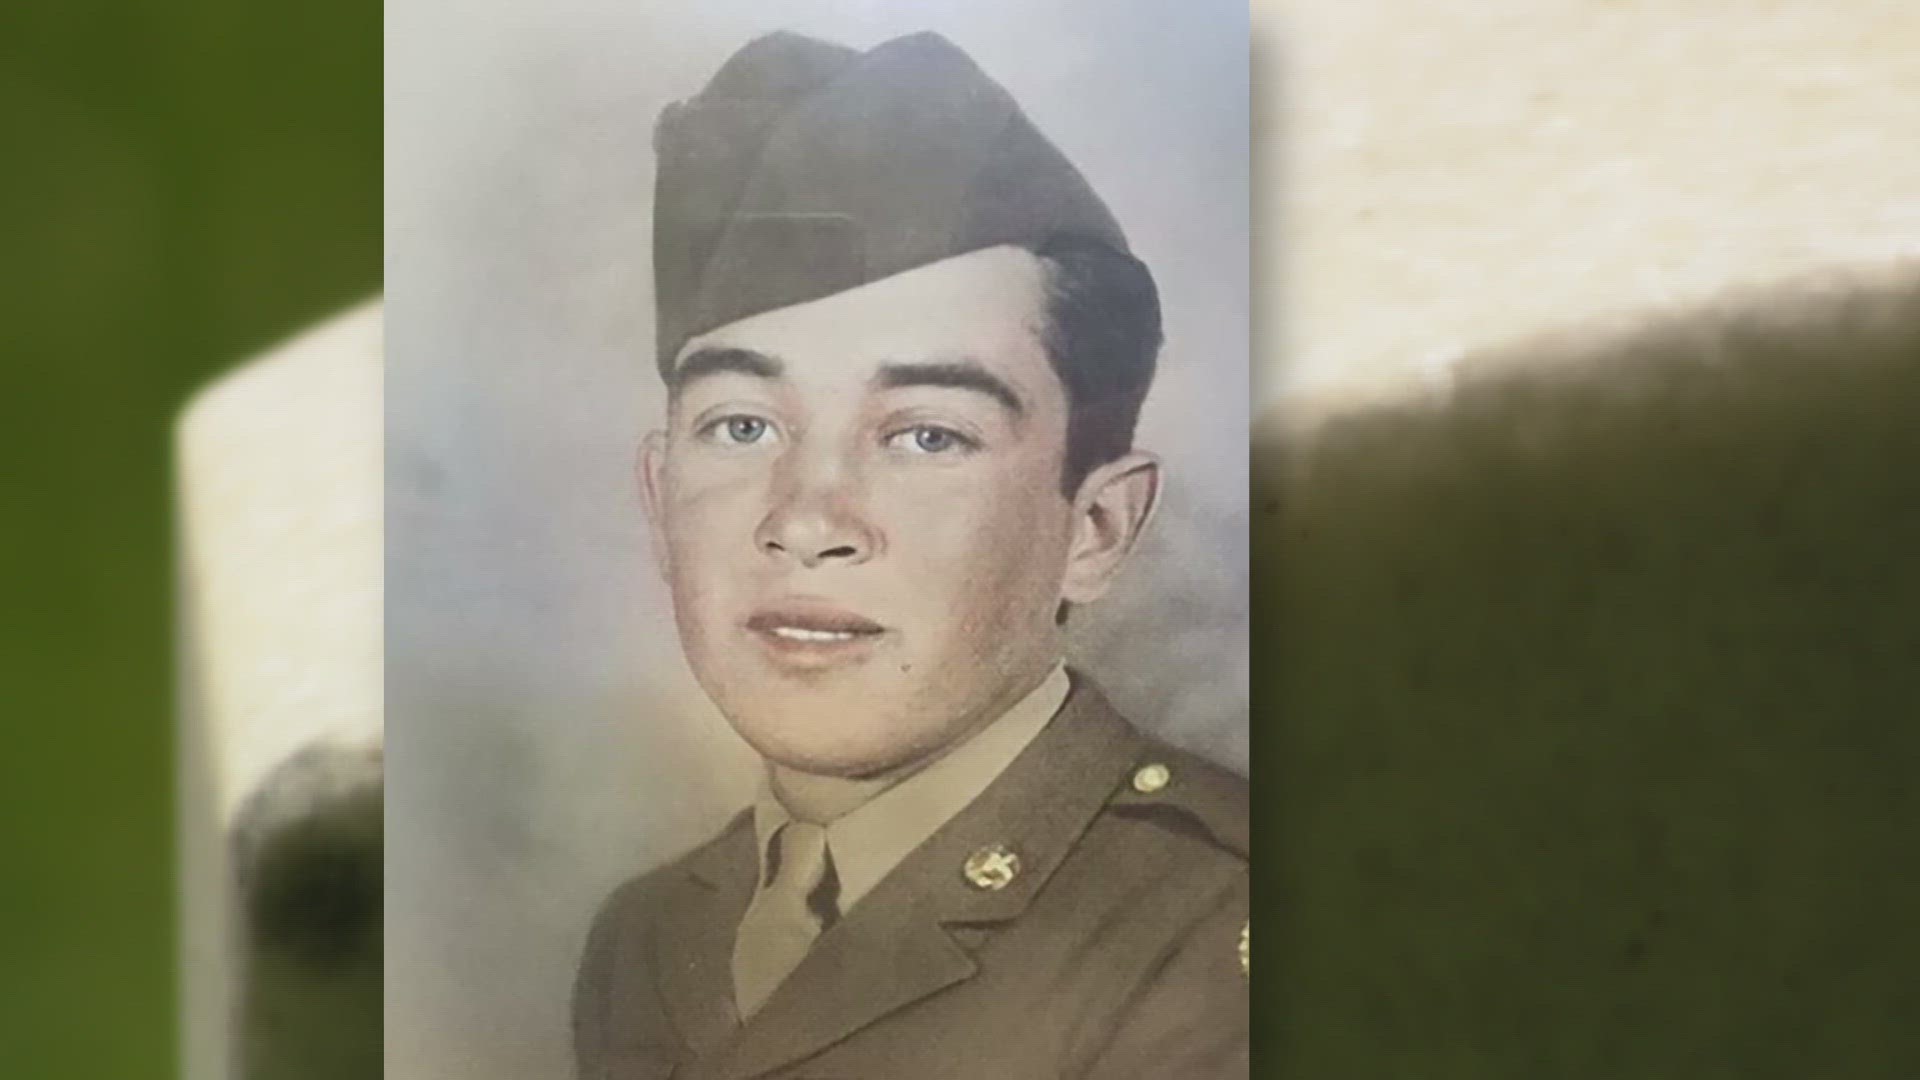 33 years have passed since George lost his Dad, an Army veteran who served during WWII, something his father rarely spoke to him about.